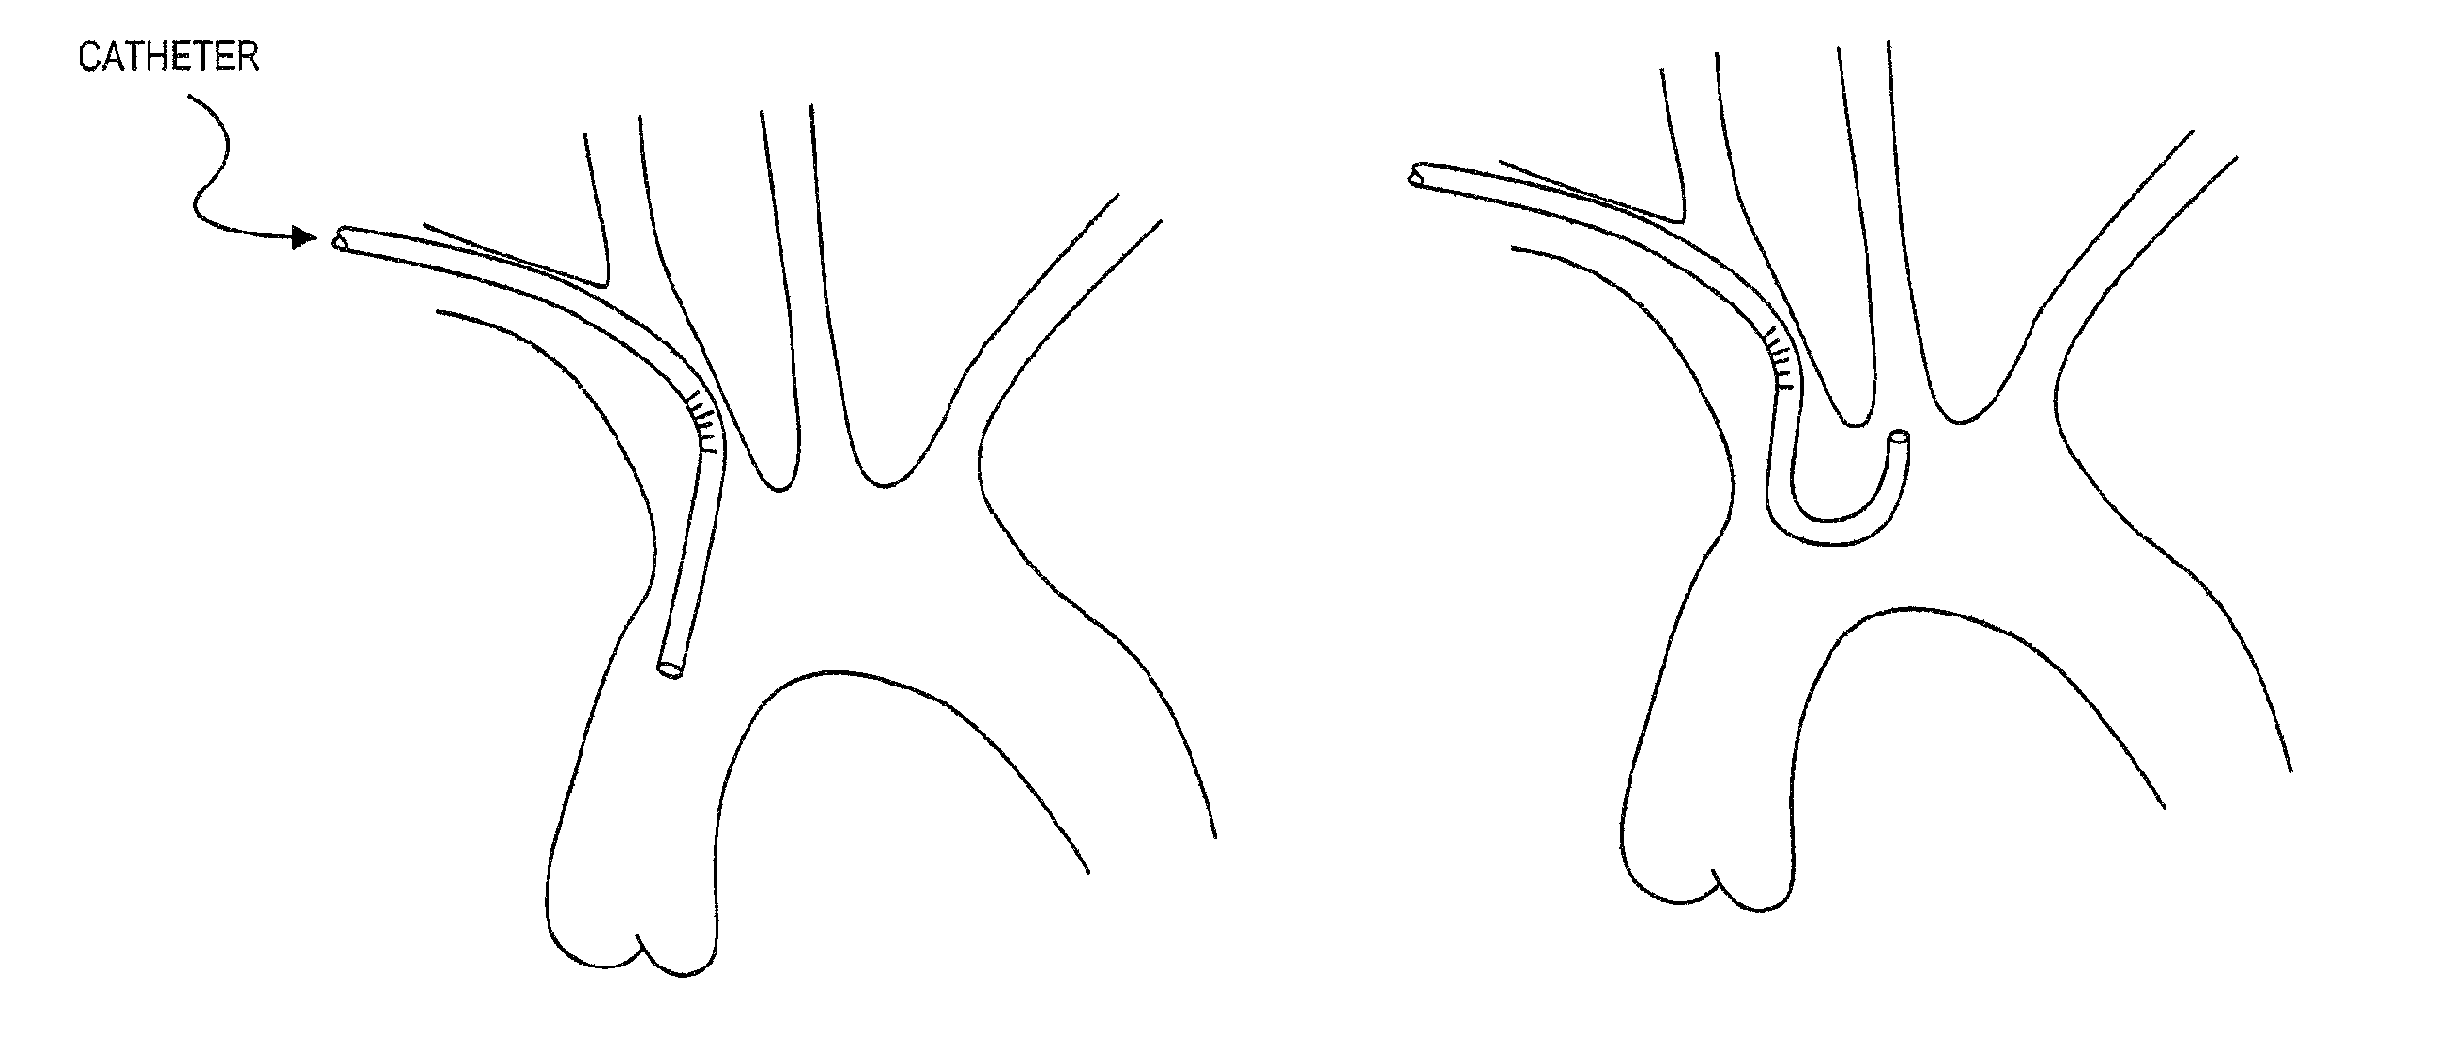 Method of accessing the left common carotid artery